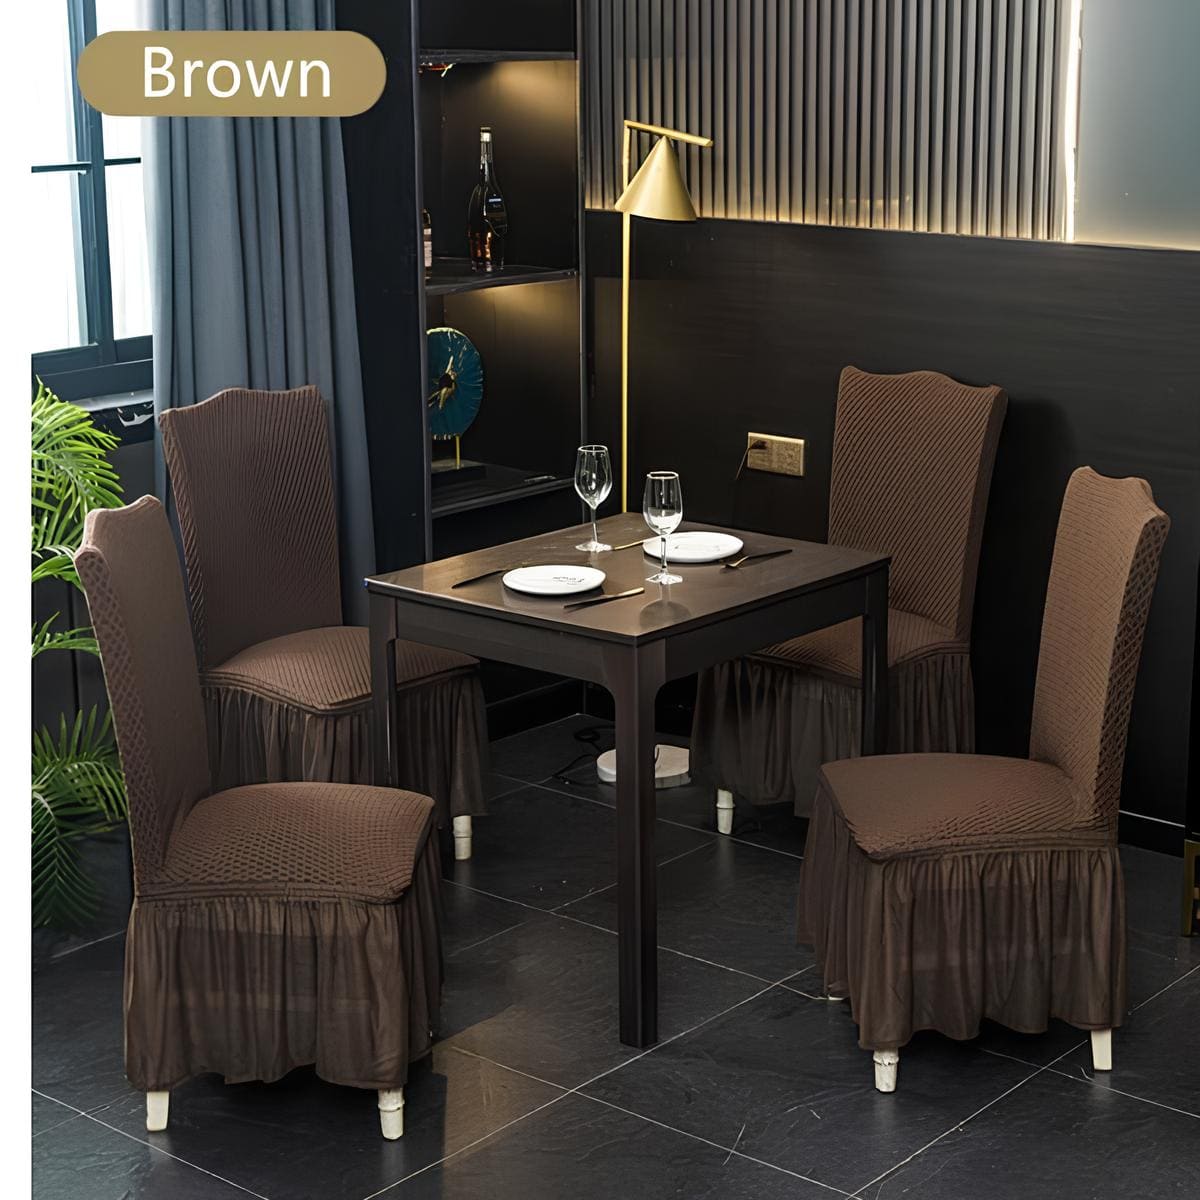 Long Frilled Dining Chair Cover-Brown